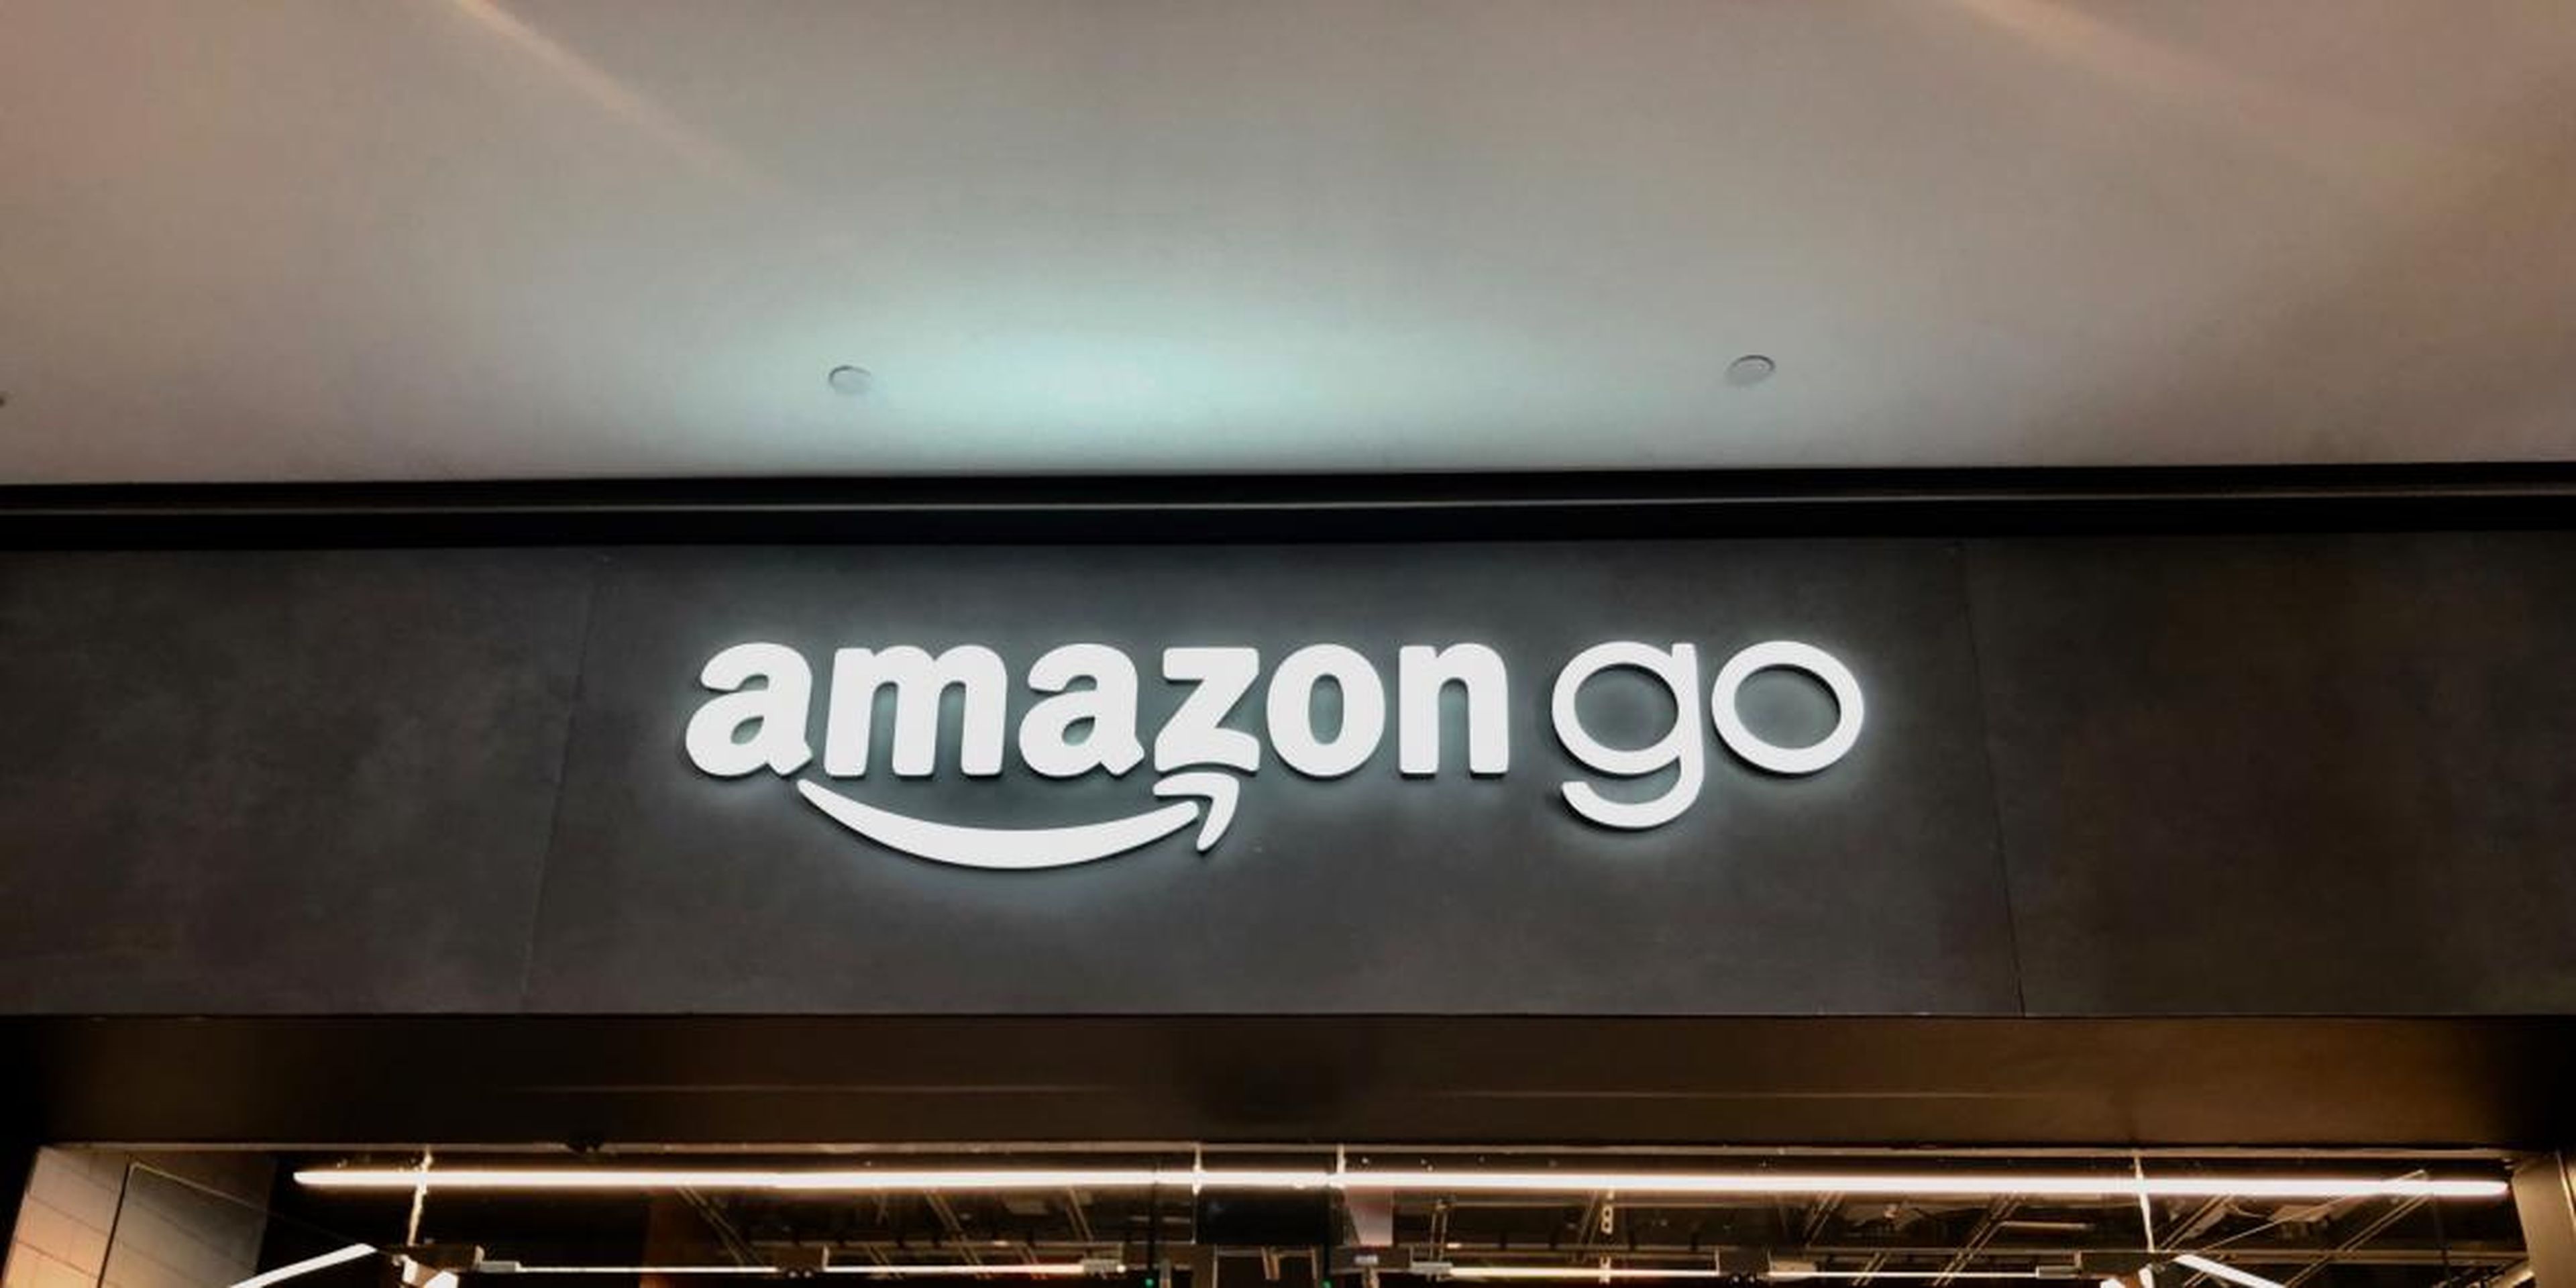 Amazon is patenting hand-recognition technology, and it could be implemented in Amazon Go stores